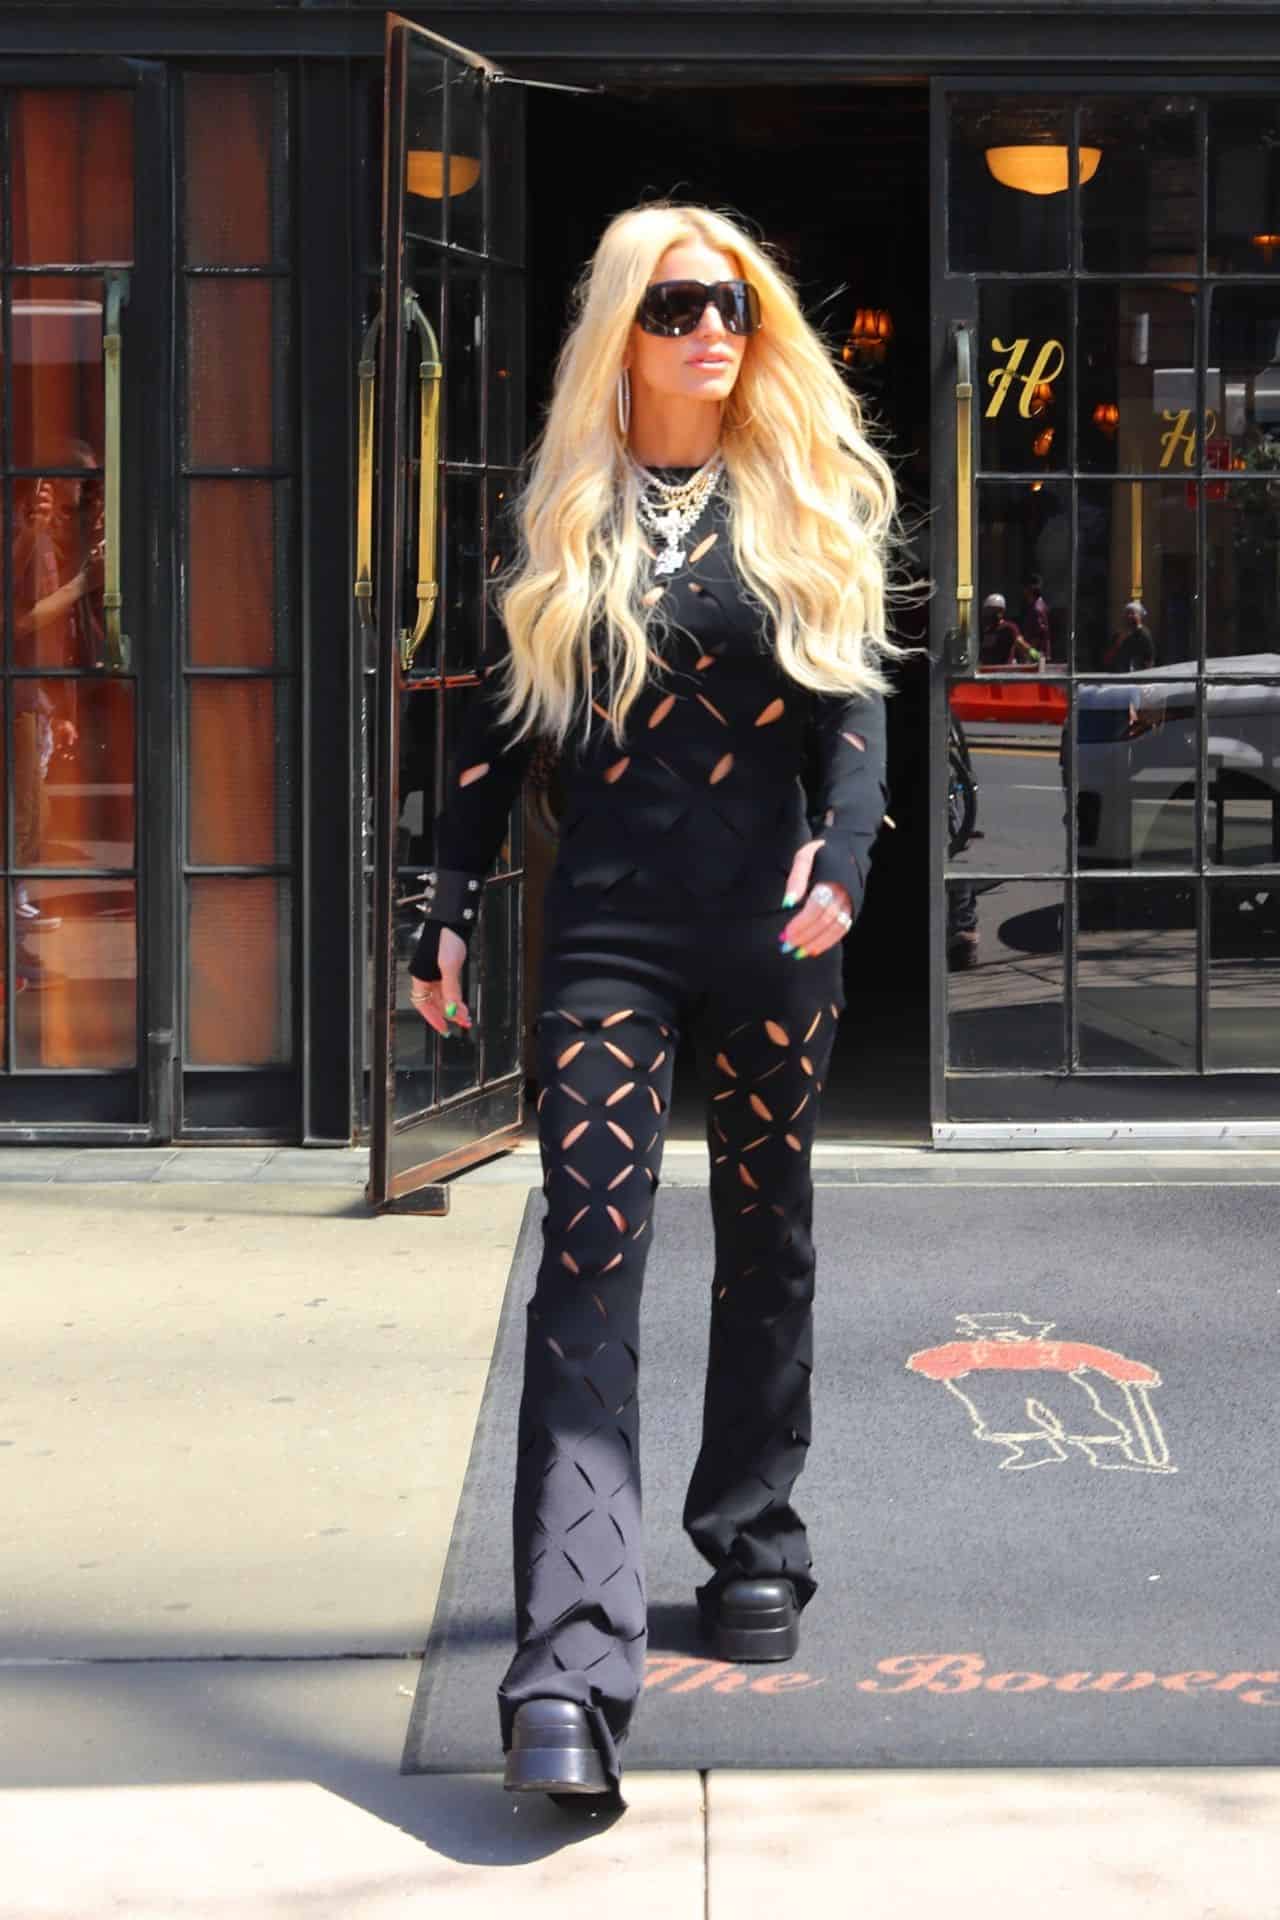 Jessica Simpson Looks Chic in an Edgy All-Black Outfit in NY